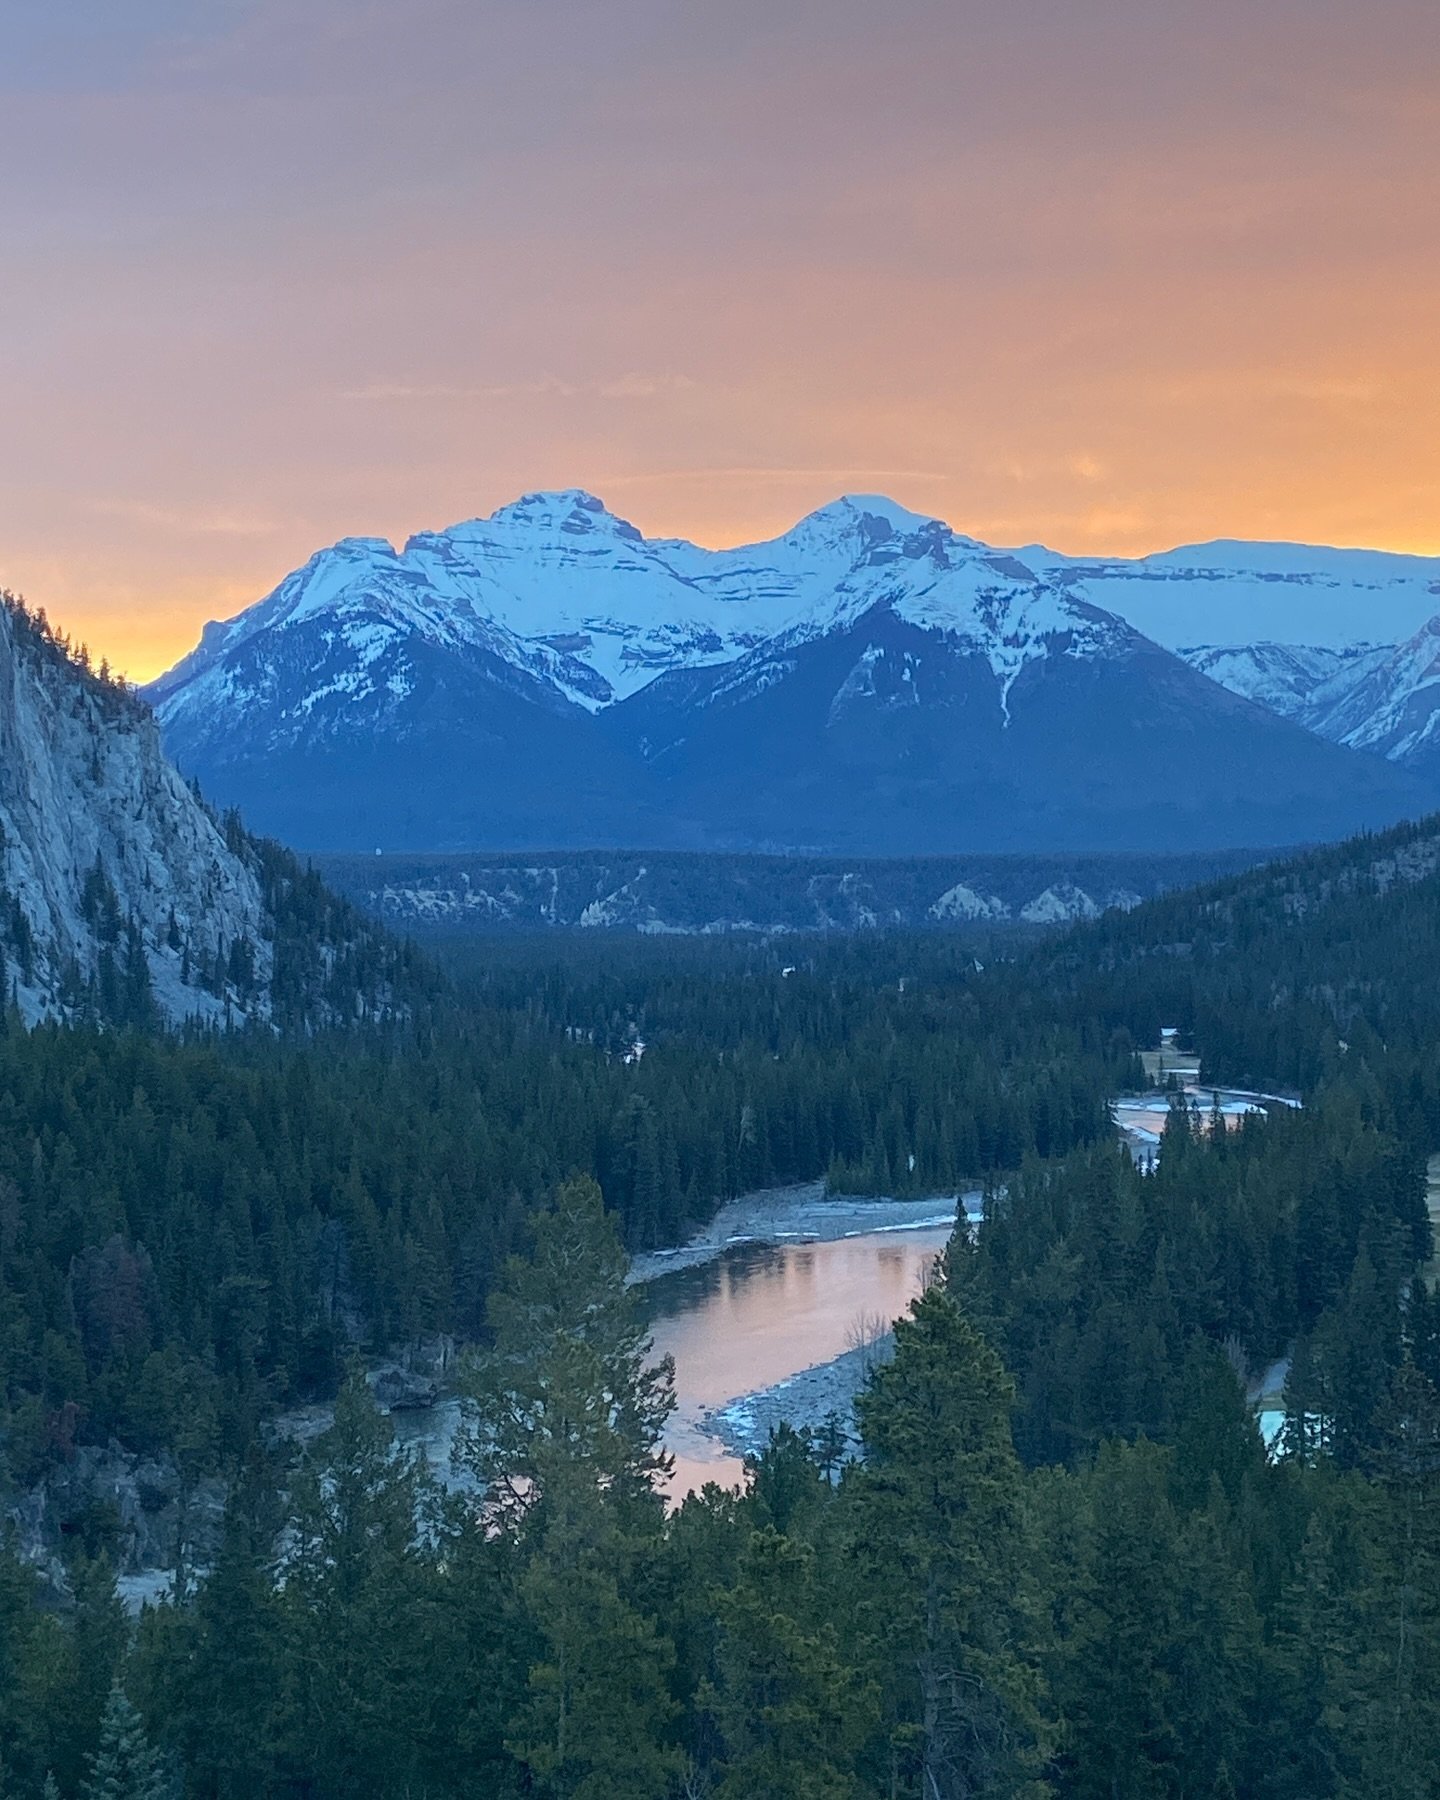 Just waking up to this view from our window at @fairmontbanff 
🏰🇨🇦🧡